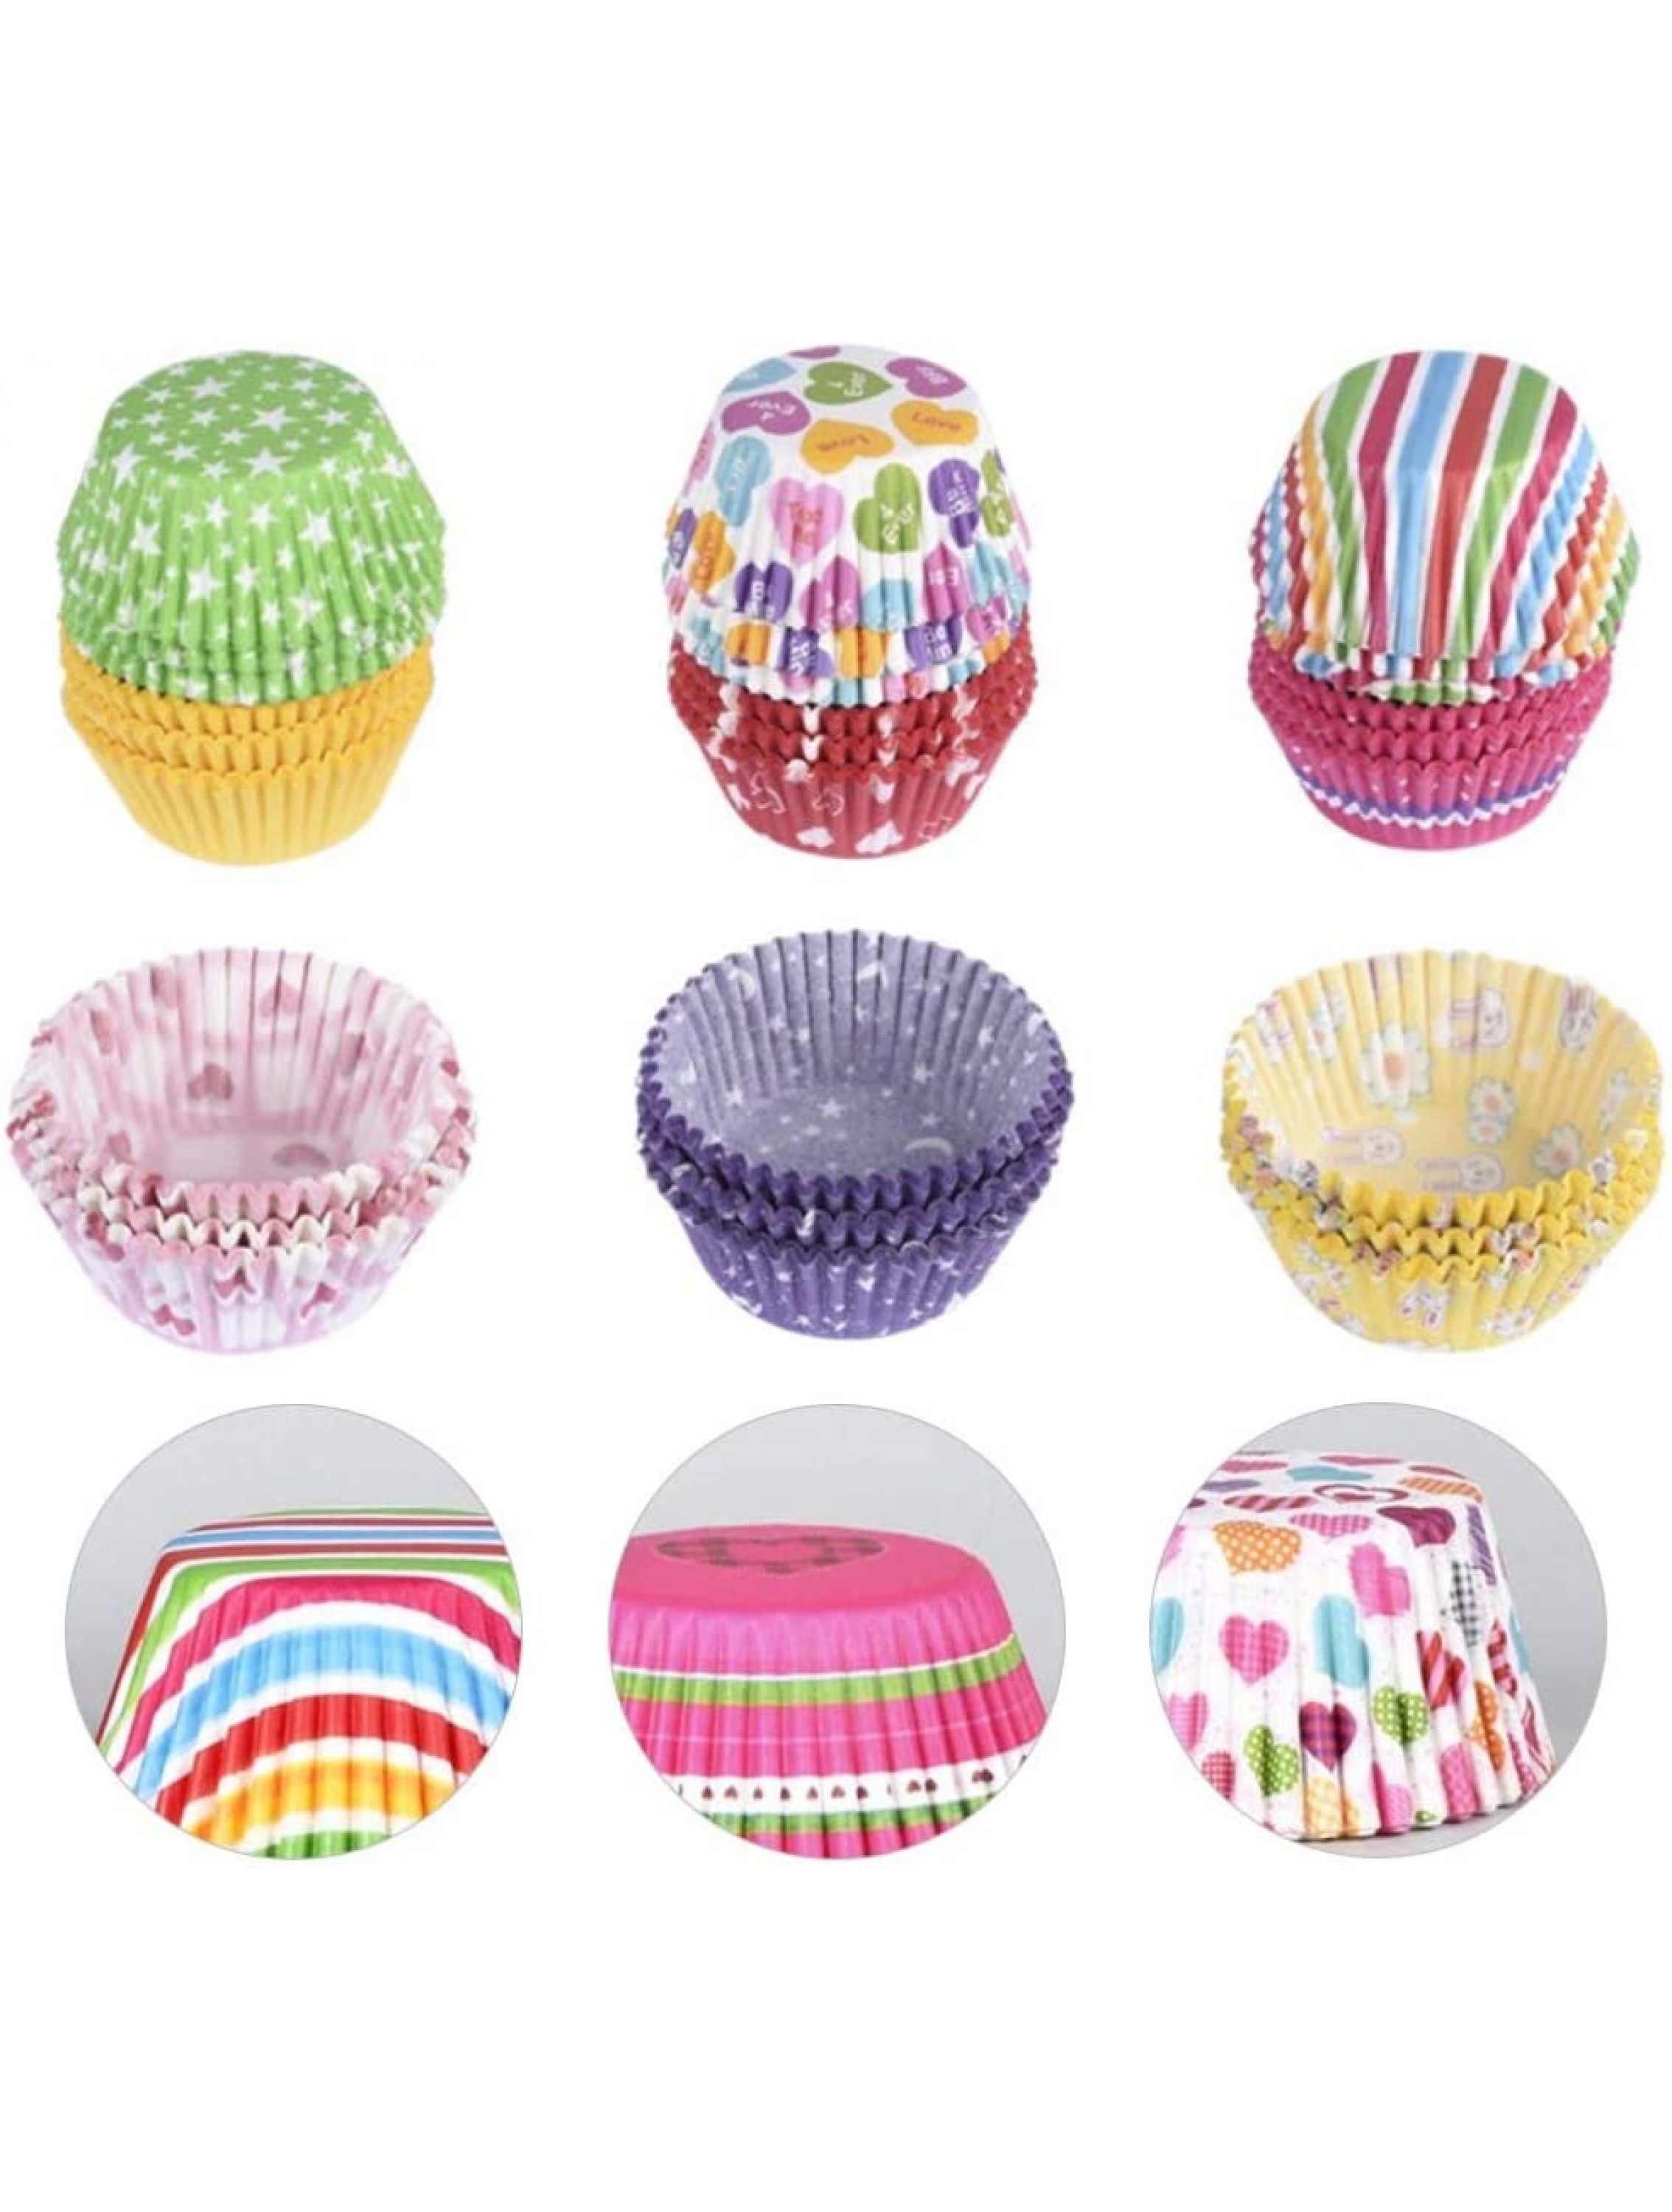 Hemoton 500Pcs Papers Cupcake Wrapper Papers Wrapper Liners Cupcake Cups Muffin Cups for Wedding Anniversary Baby Shower Birthday Party Decoration - BTVO9SVP3